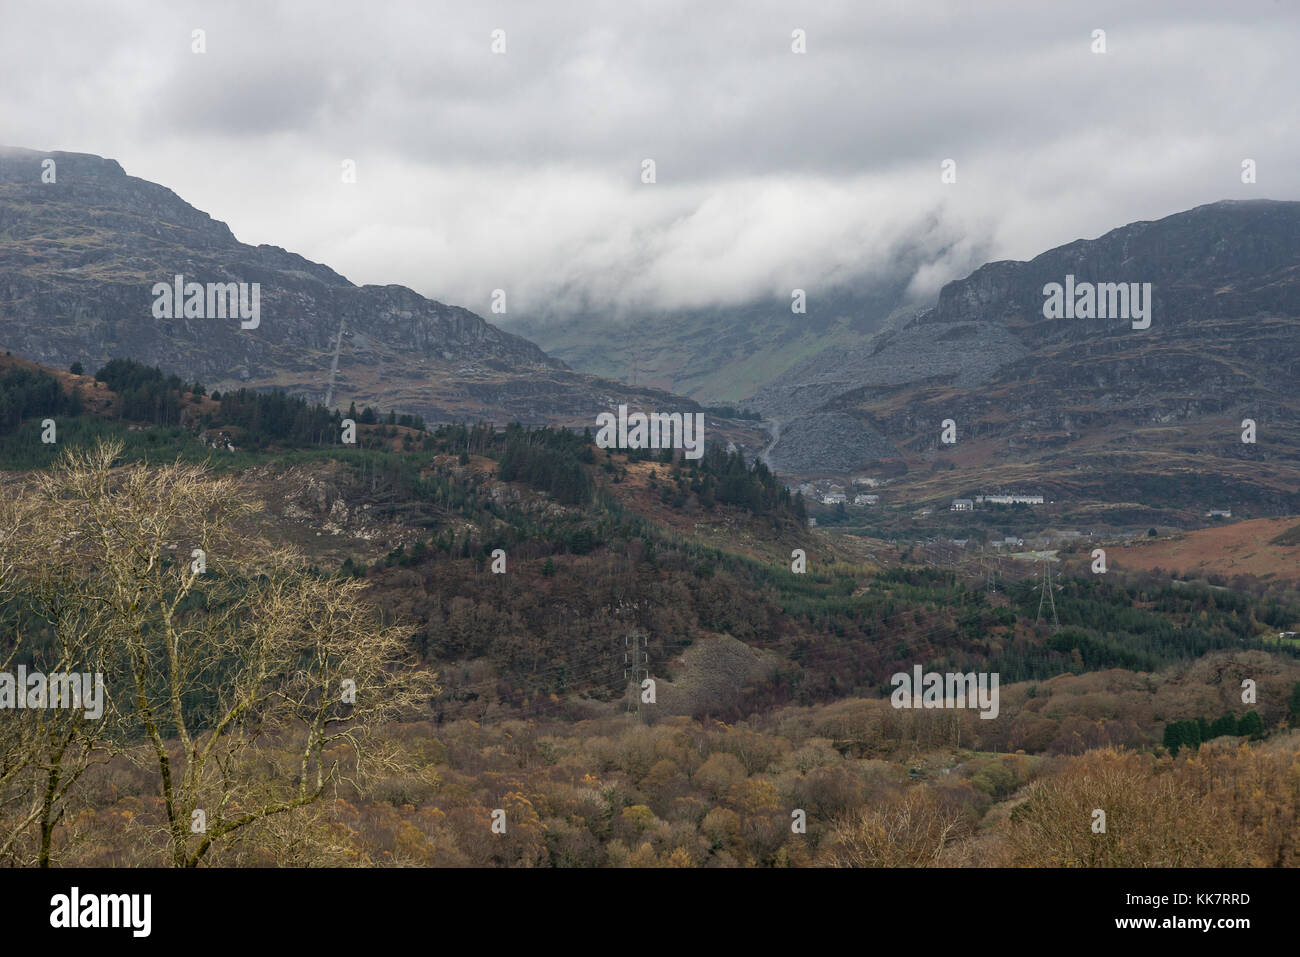 Low cloud over the mountains at Blaenau Ffestiniog in North Wales. Seen from the viewpoint at Llan Ffestiniog. Stock Photo